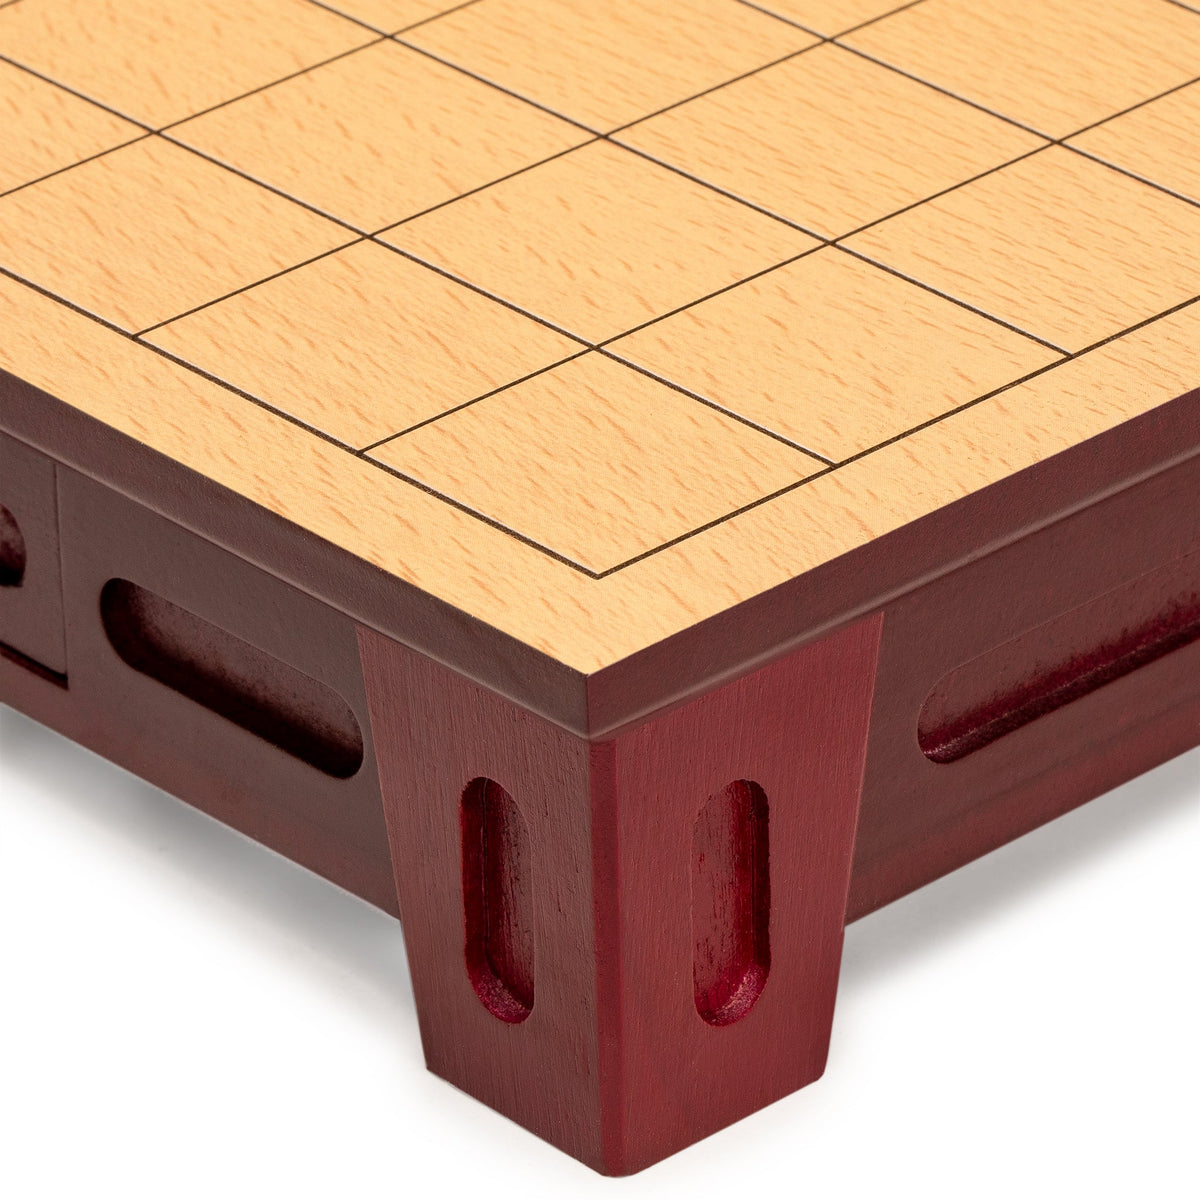 Shogi Japanese Chess Game Set with Wooden Board and Koma Pieces